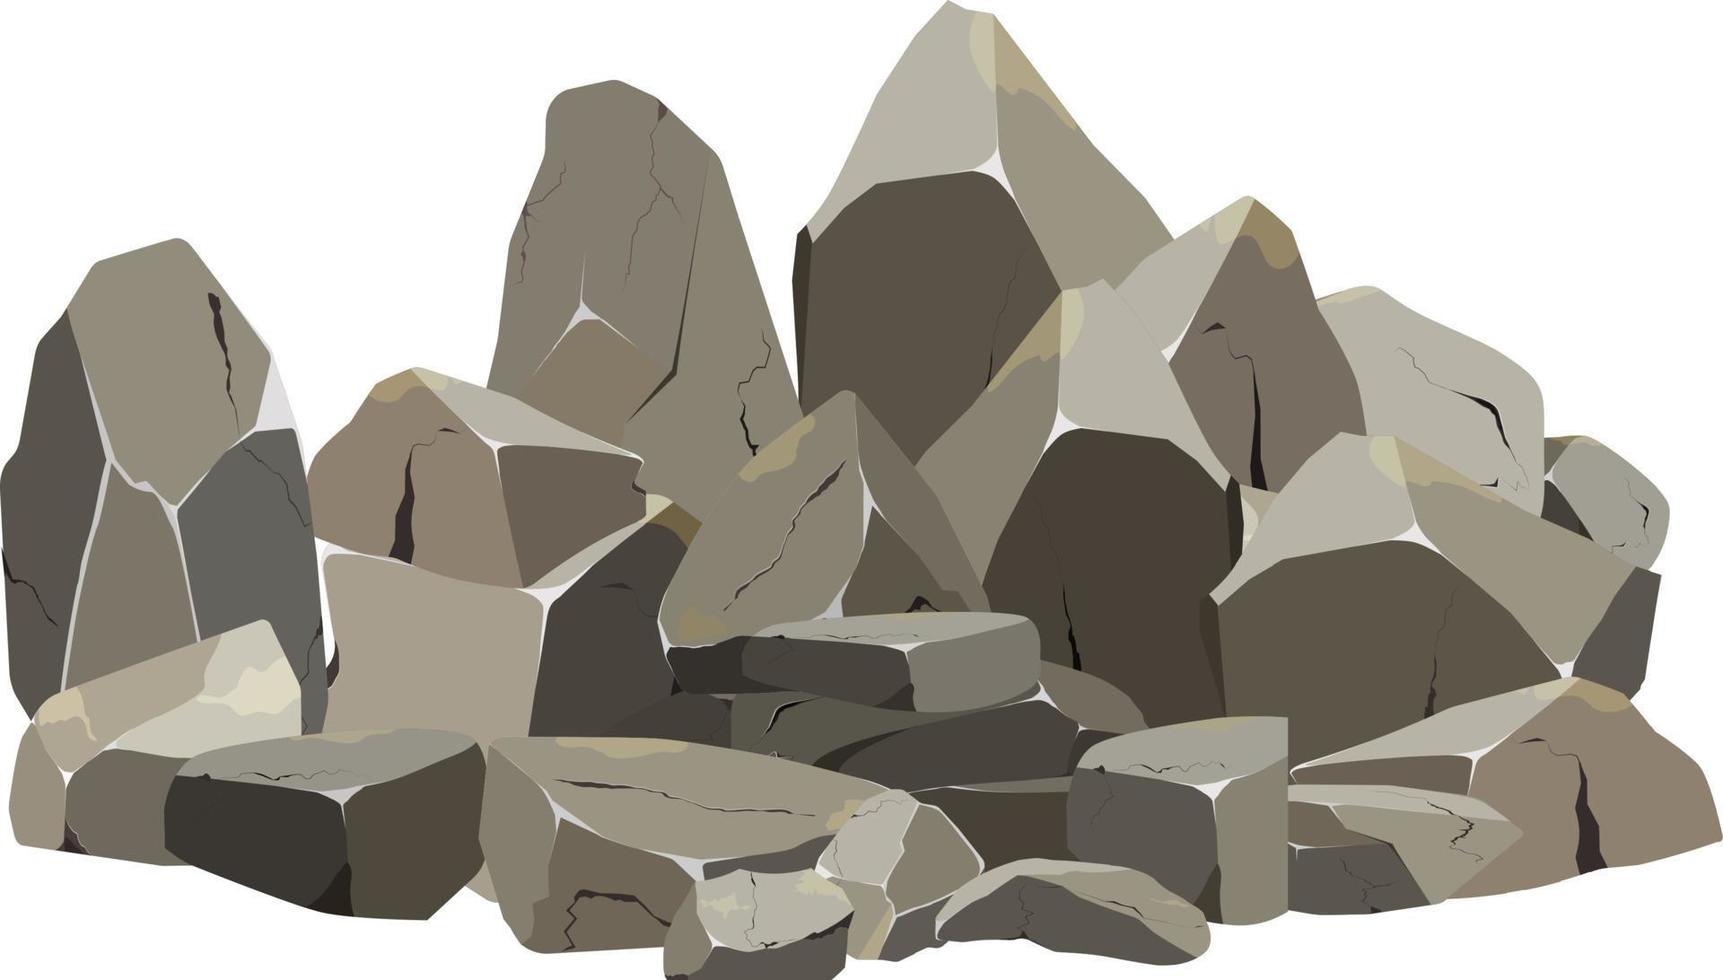 Collection of stones of various shapes and bushes.Coastal pebbles,cobblestones,gravel,minerals and geological formations.Rock fragments,boulders and building material. vector